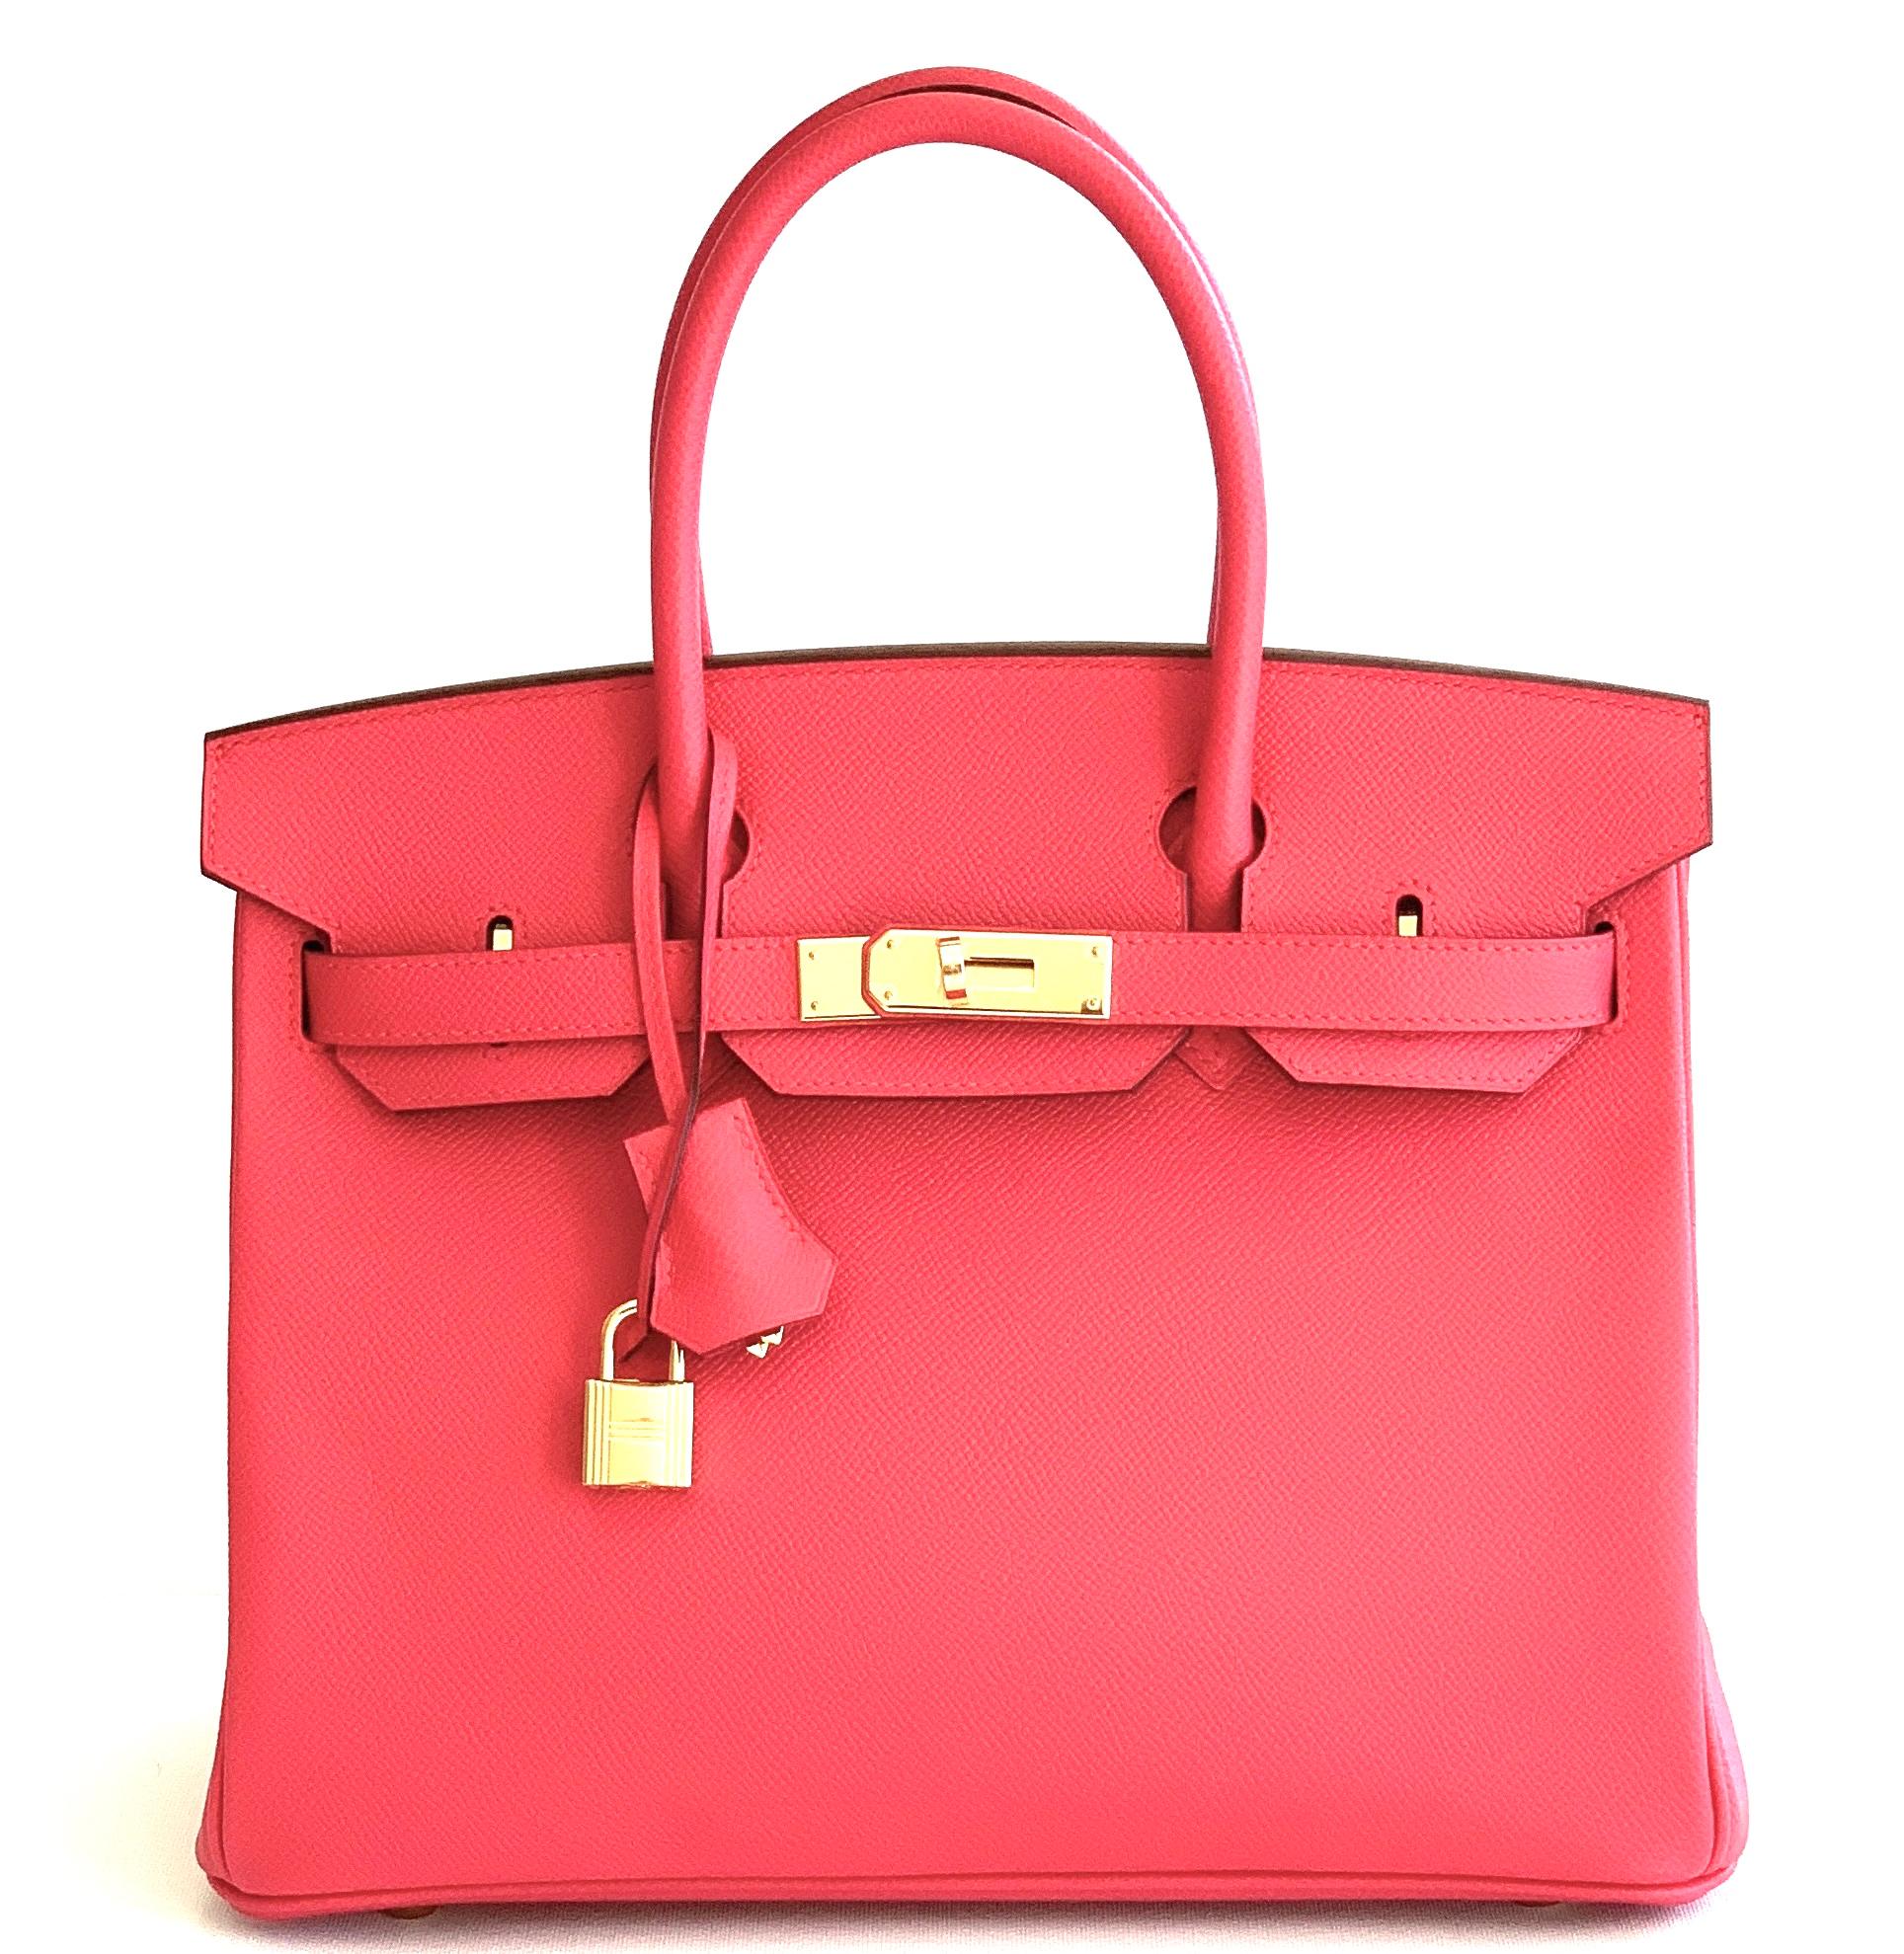 Hermès Rose Extreme Epsom Birkin 30cm Gold Hardware
New Color Rose Extreme Pink
Epsom leather
Gold Hardware
Stunning new Birkin
Tonal stitching, two straps with front toggle closure, clochette with lock and two keys and double rolled handles.
Approx